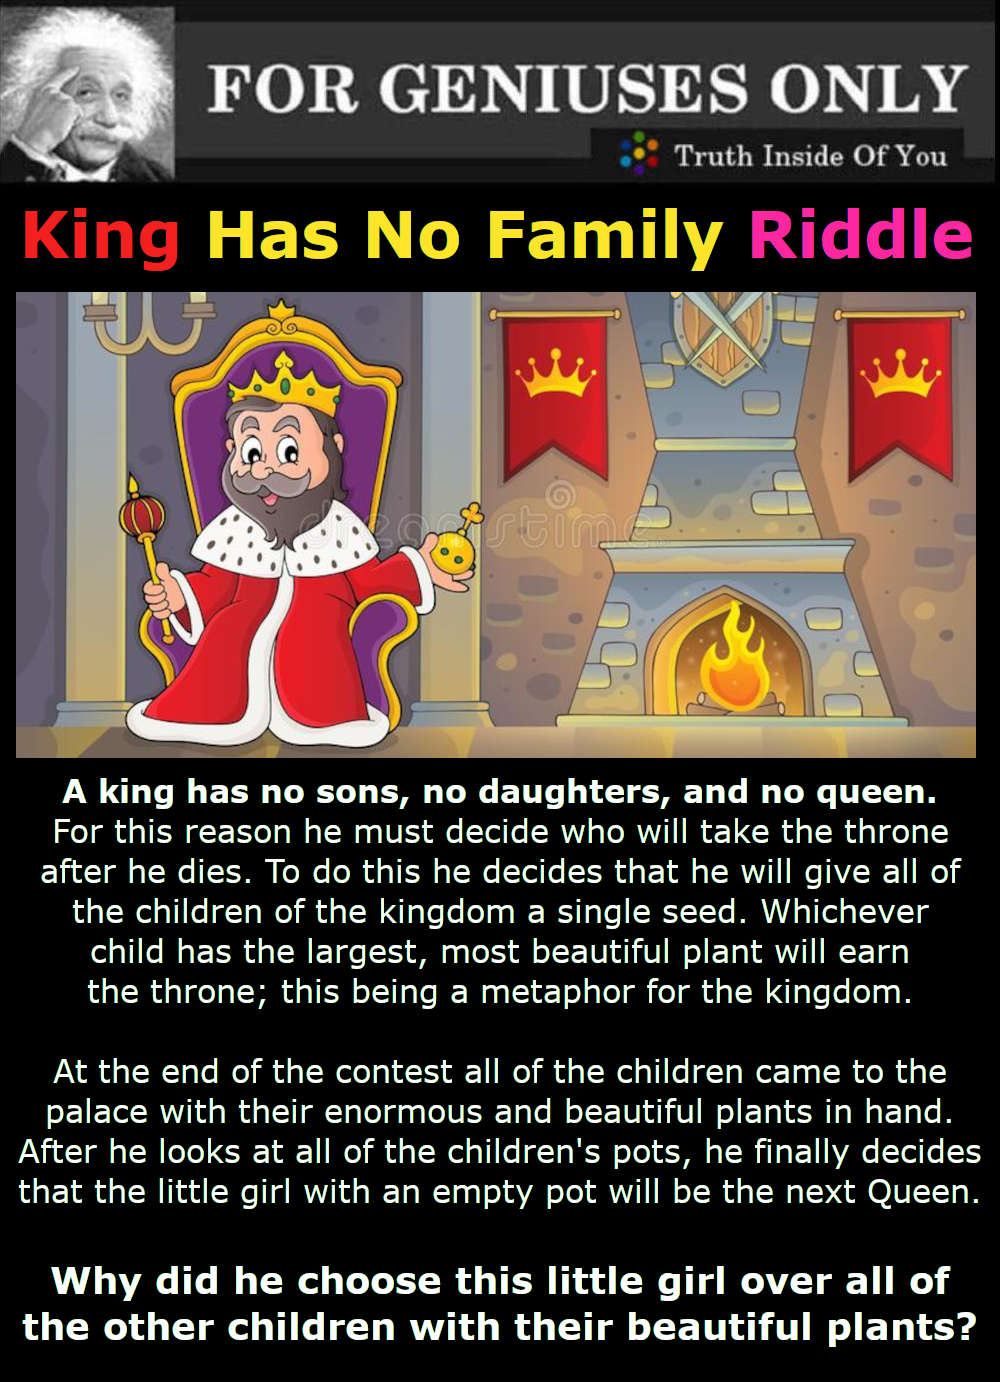 King Has No Family Riddle